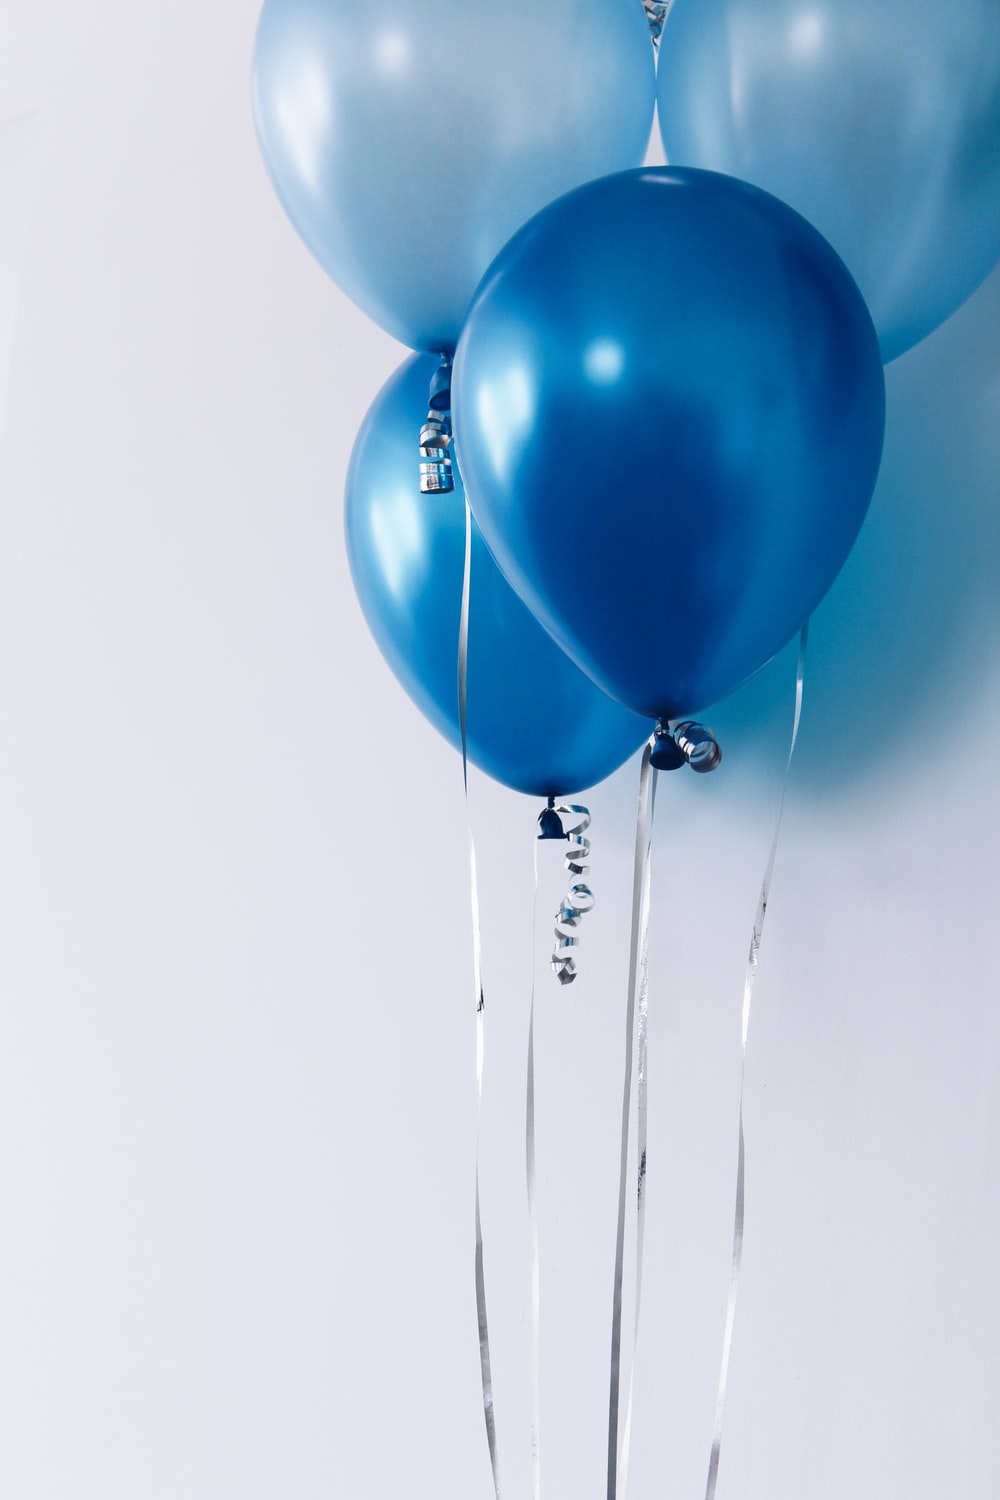 100 Balloons Pictures Download Free Images on